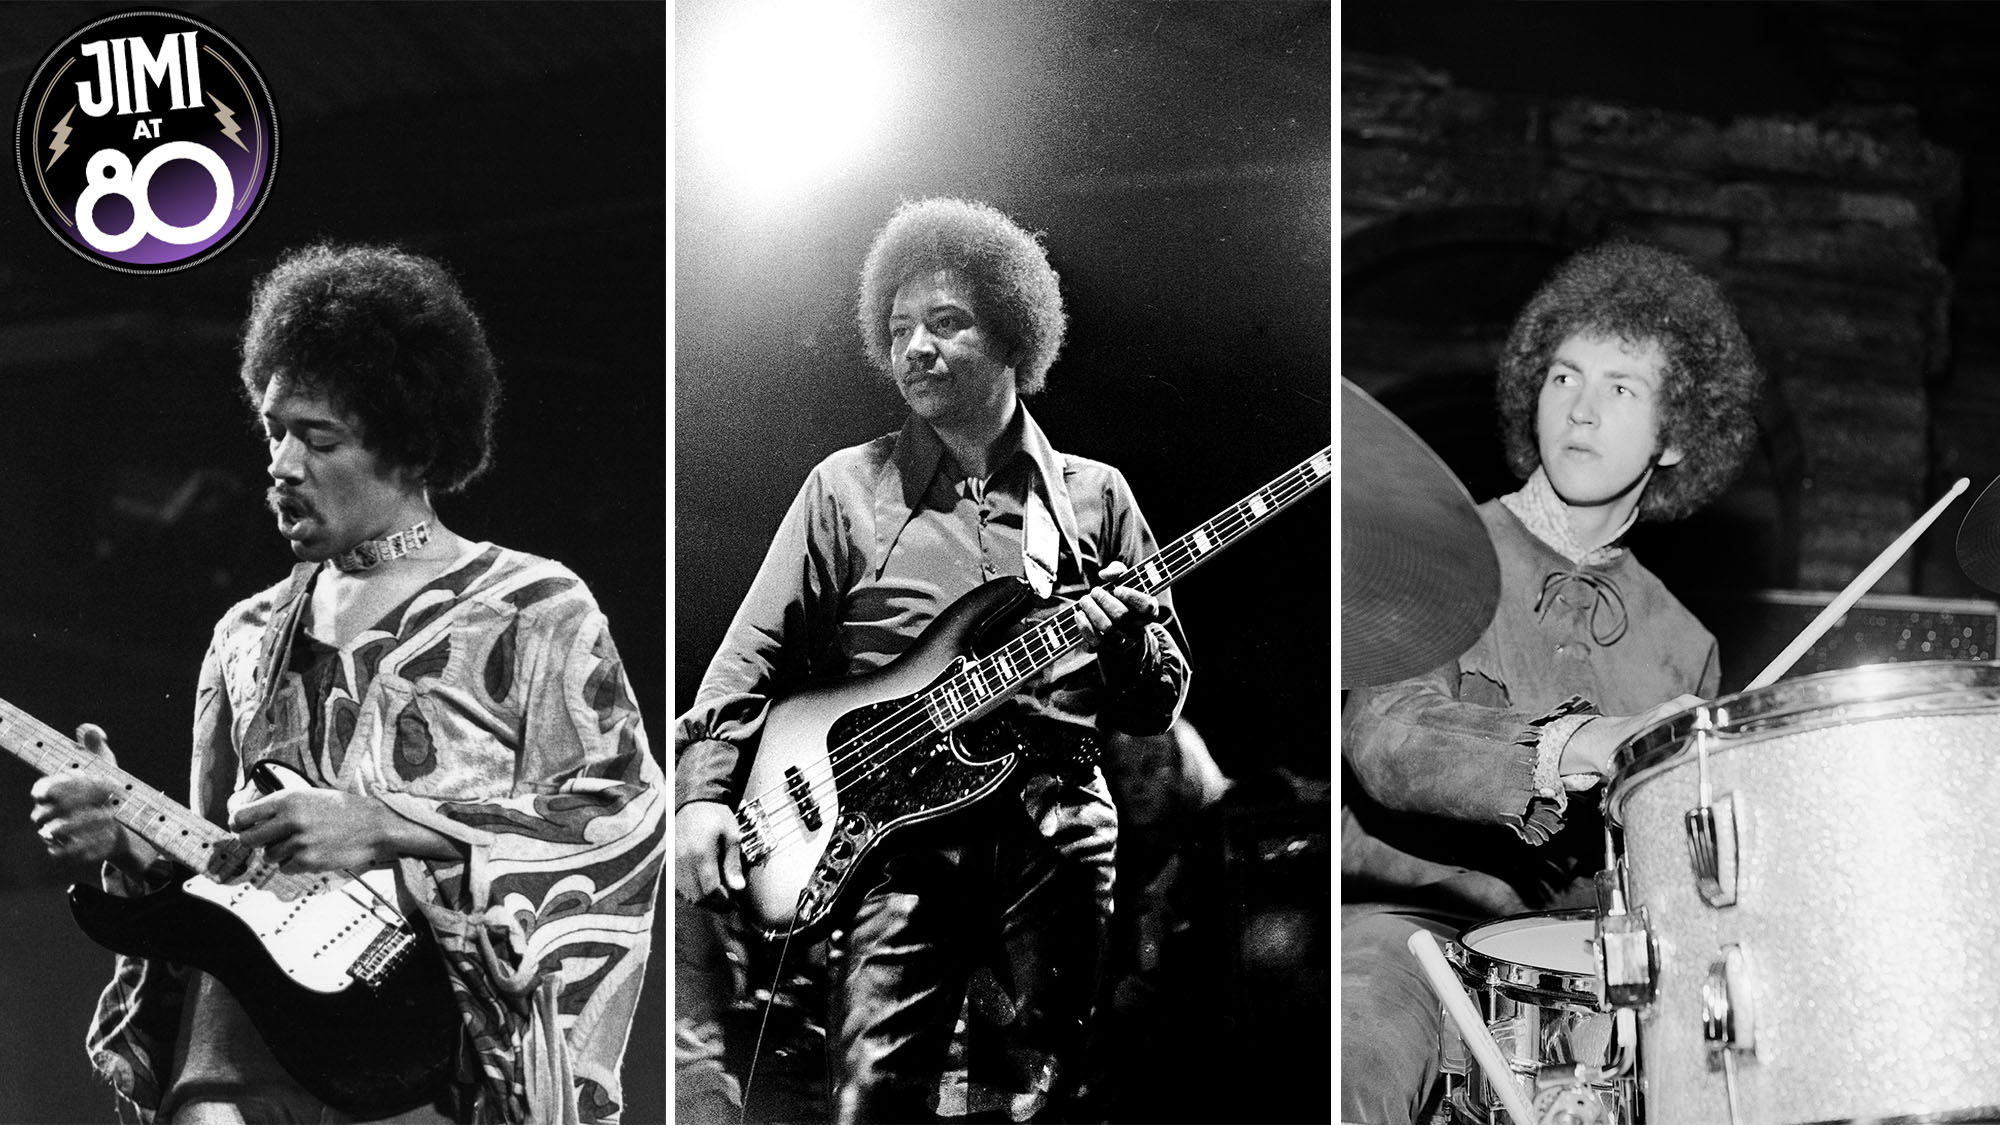 It was a wild scene up there: The Jimi Hendrix Experience's Billy